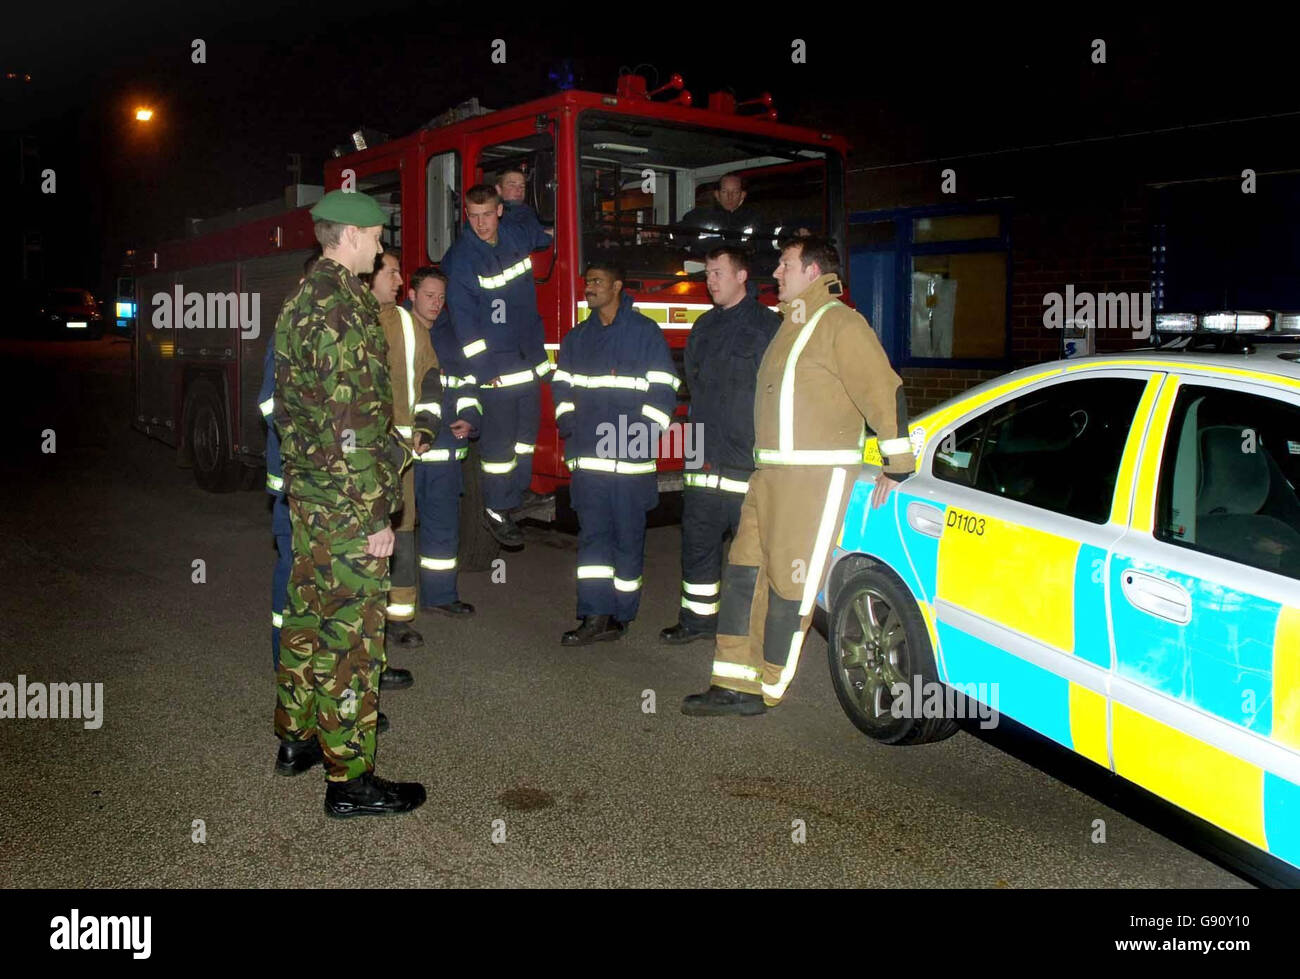 Members of the millitary stand in for fire fighters outside Birmingham fire fighter headquarters, Monday November 14, 2005. The move follows the announcement of a strike after eleventh-hour talks to settle a dispute over working conditions ended in failure. West Midlands Fire Service said the Fire Brigades Union had rejected a 'last ditch' offer made by management in an attempt to avert a three-hour walk-out beginning at 6pm. See PA Story INDUSTRY Fire. PRESS ASSOCIATION Photo. Photo credit should read: Rui Vieira/PA Stock Photo